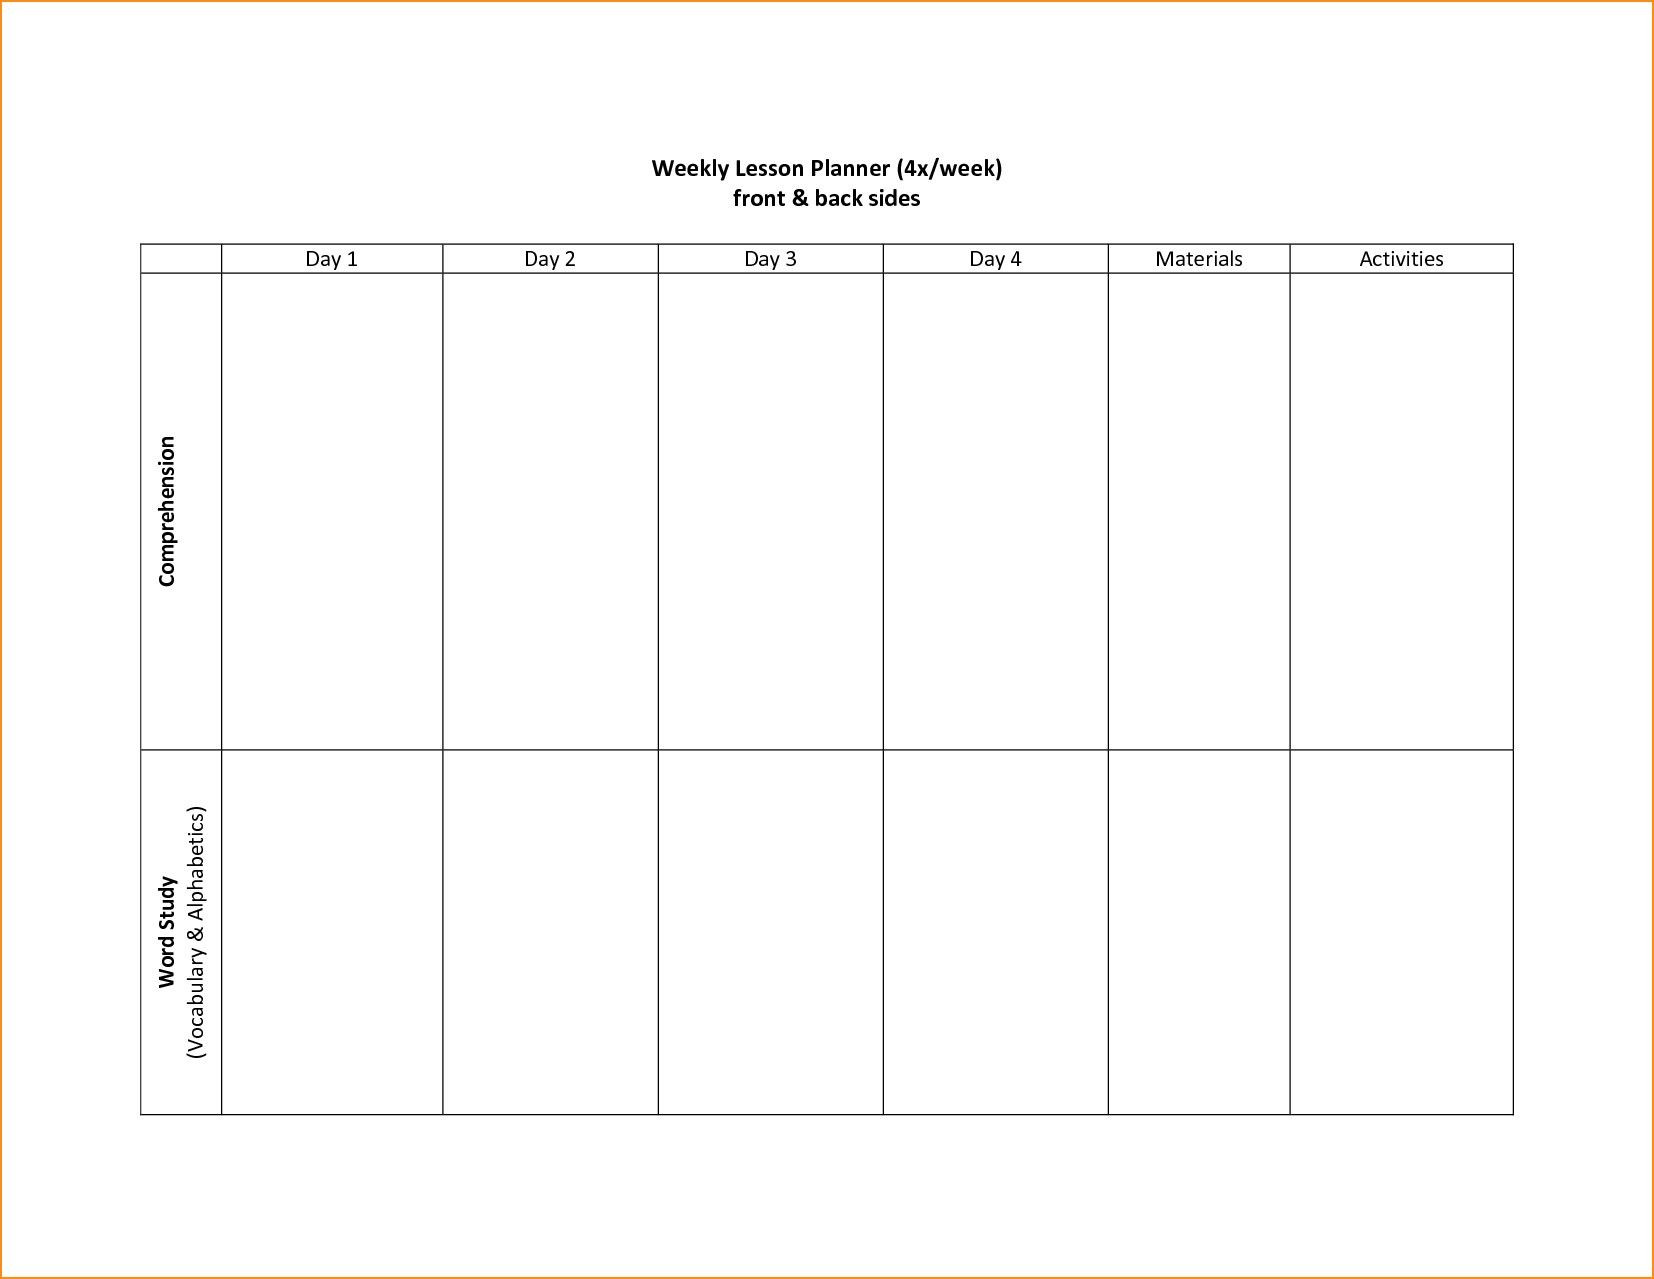 Week Calendar Template Word the Awesome Two Week Calendar Template Word – Colonad7